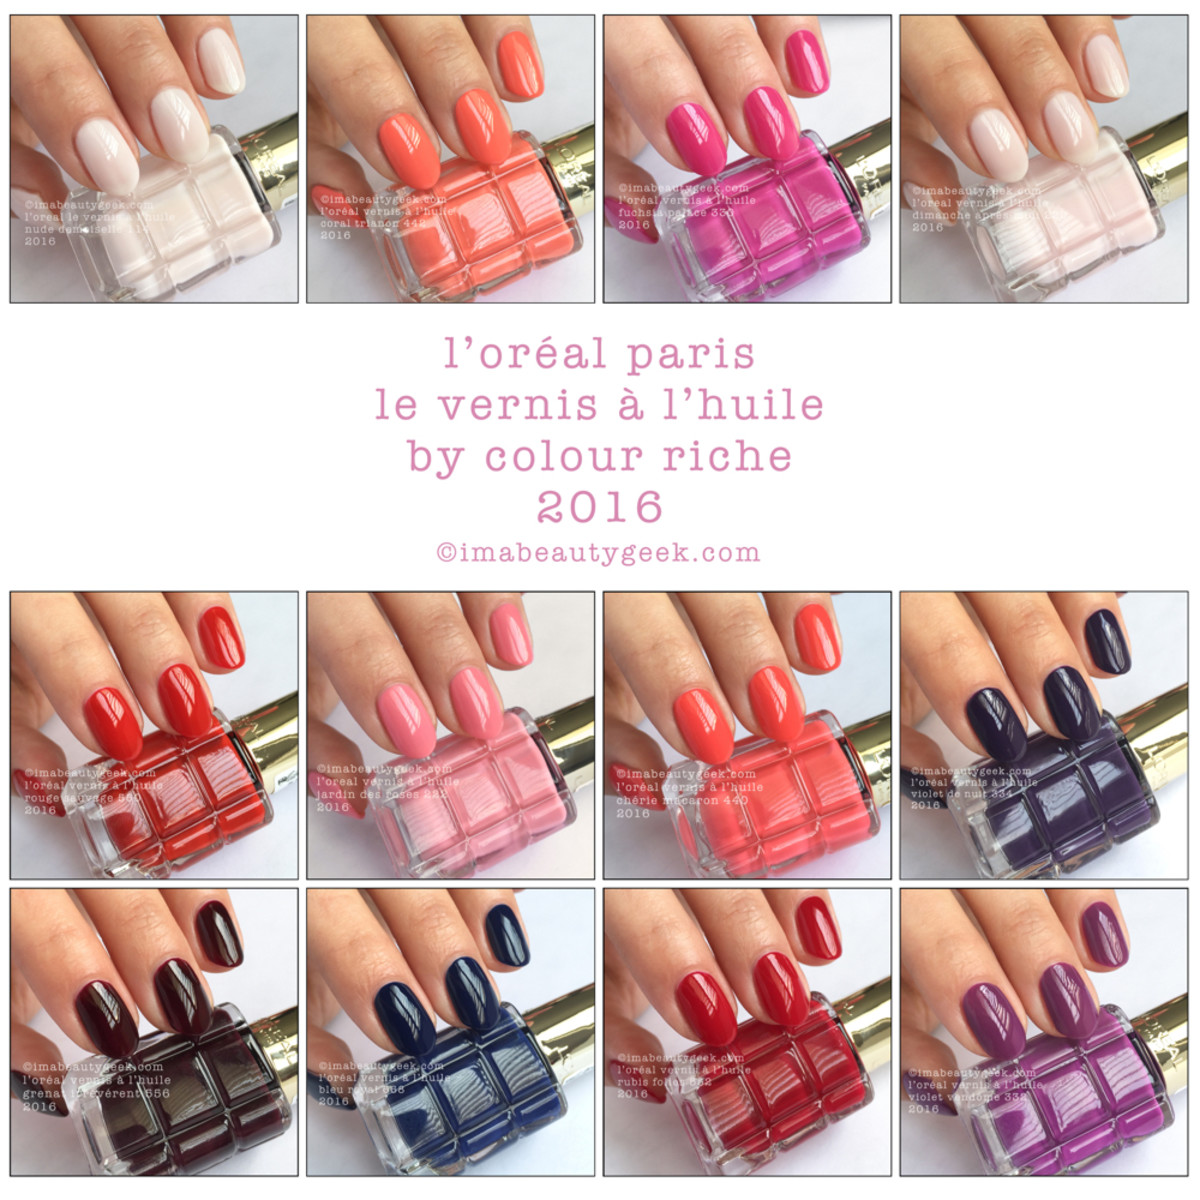 LOreal Paris Le Vernis A LHuile Nail Polish Swatches and Review